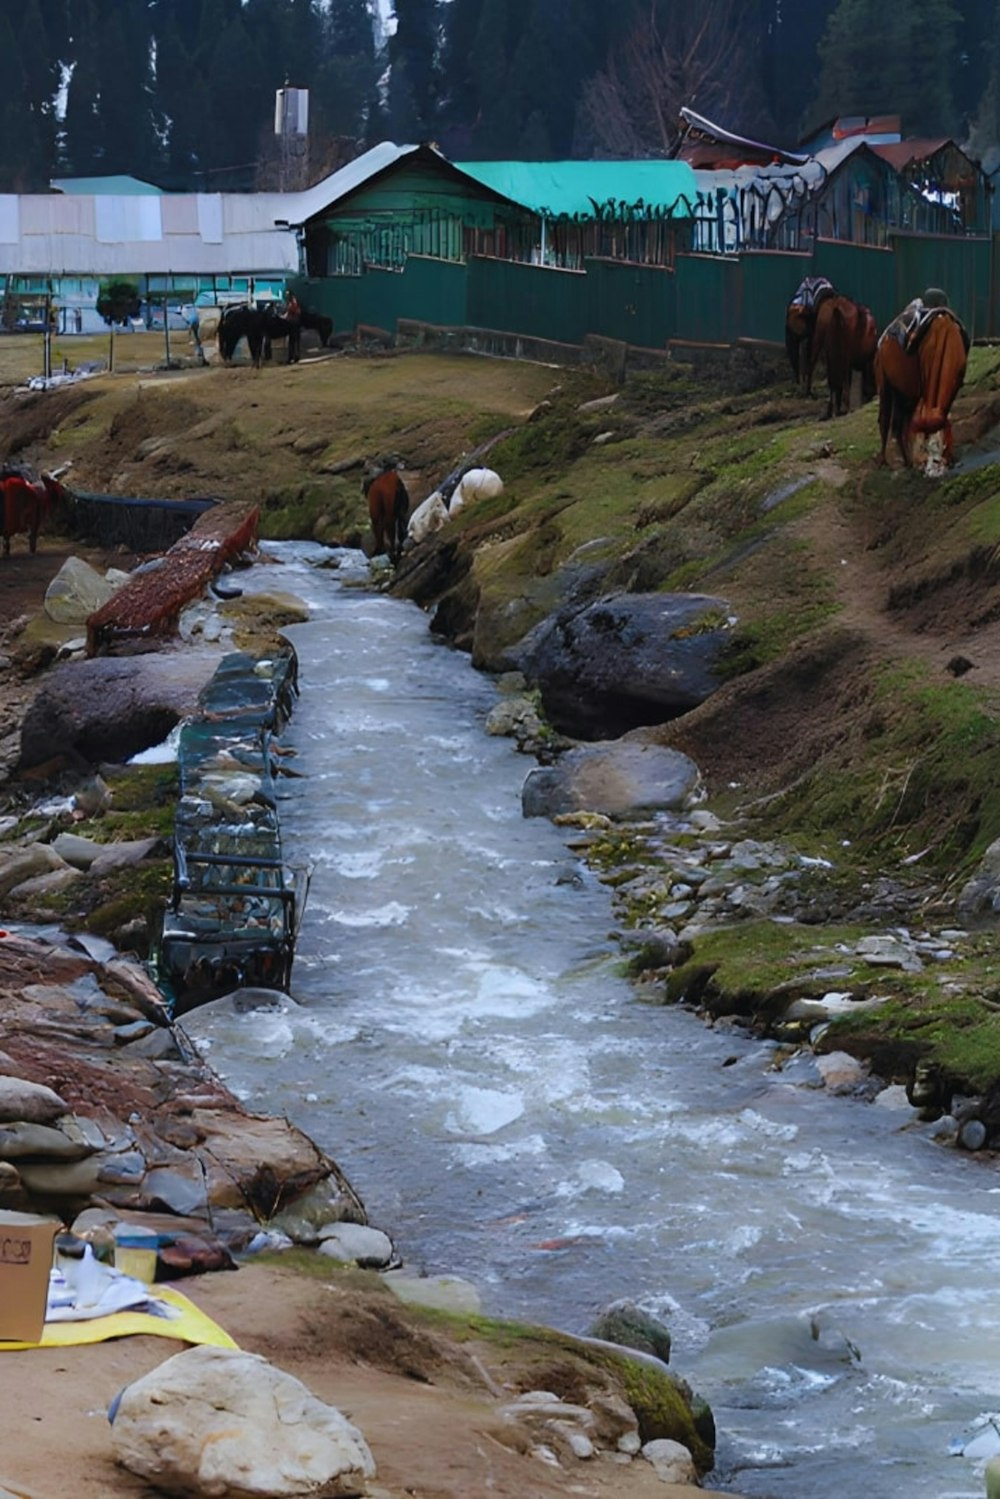 a stream of water with horses in the background